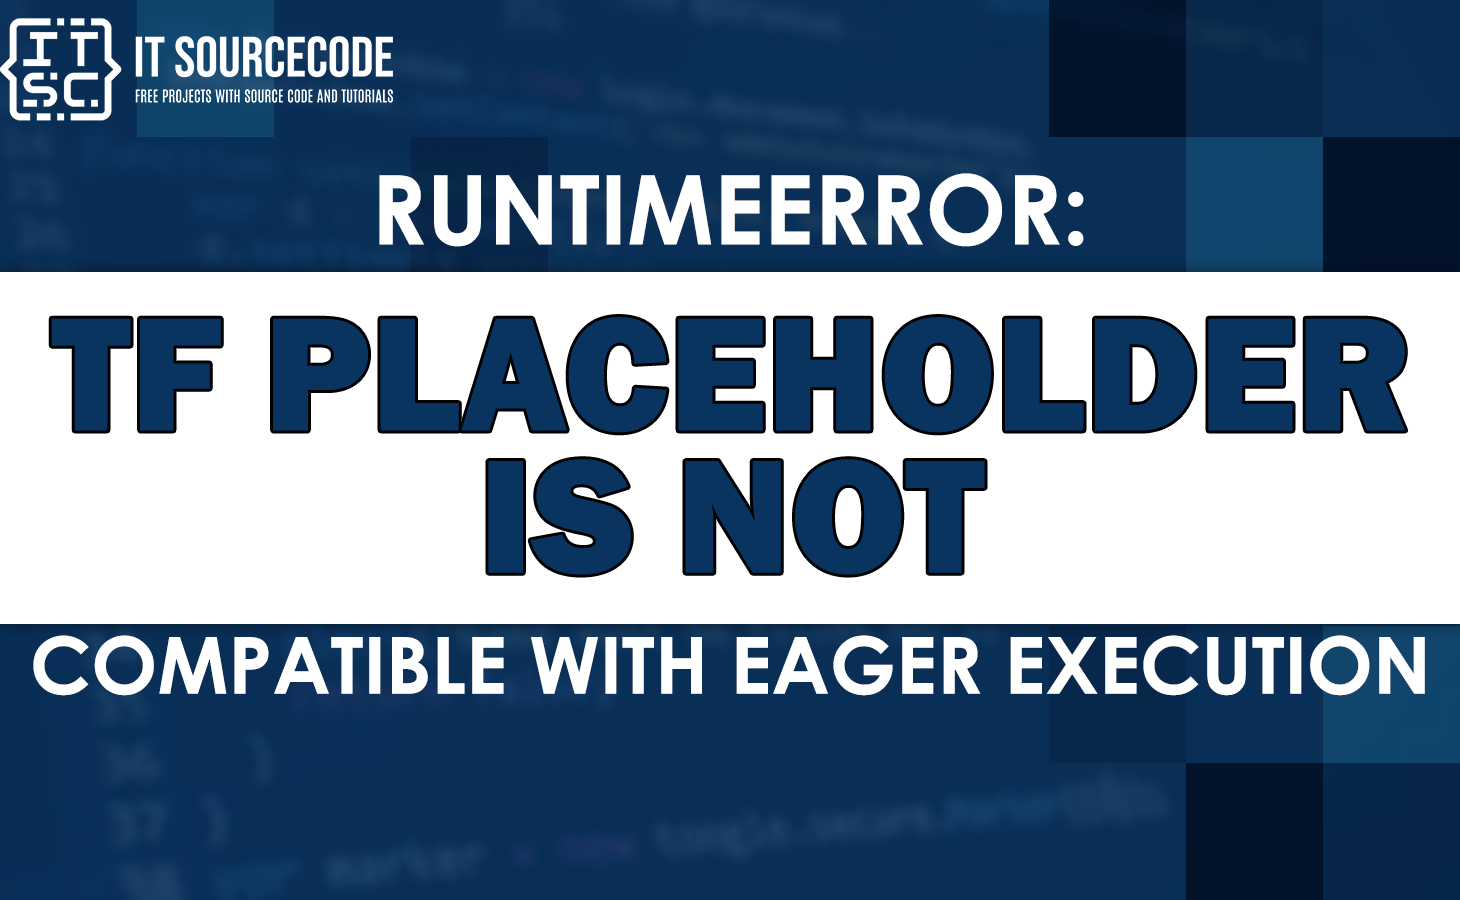 runtimeerror tf placeholder is not compatible with eager execution